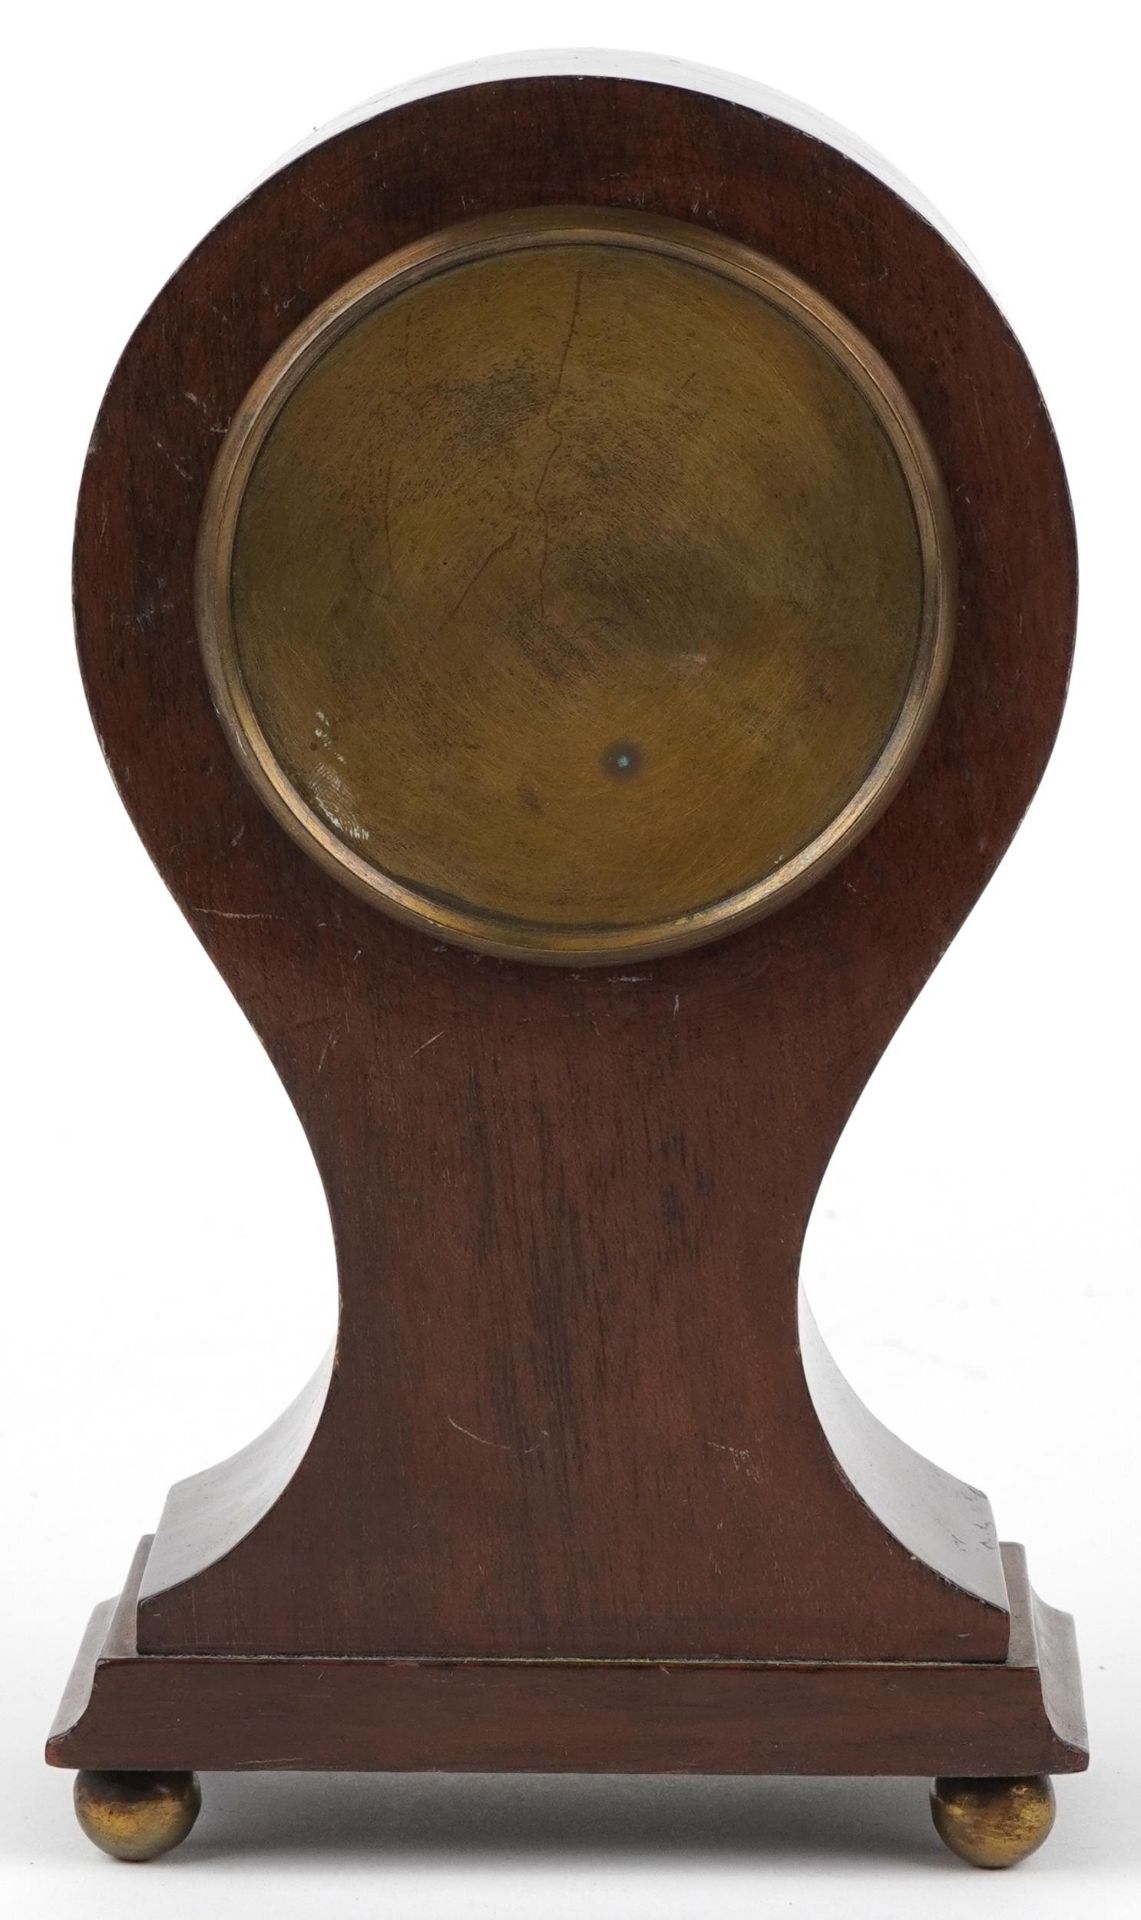 Edwardian inlaid mahogany balloon shaped mantle clock with enamelled dial having Roman numerals, - Image 3 of 4